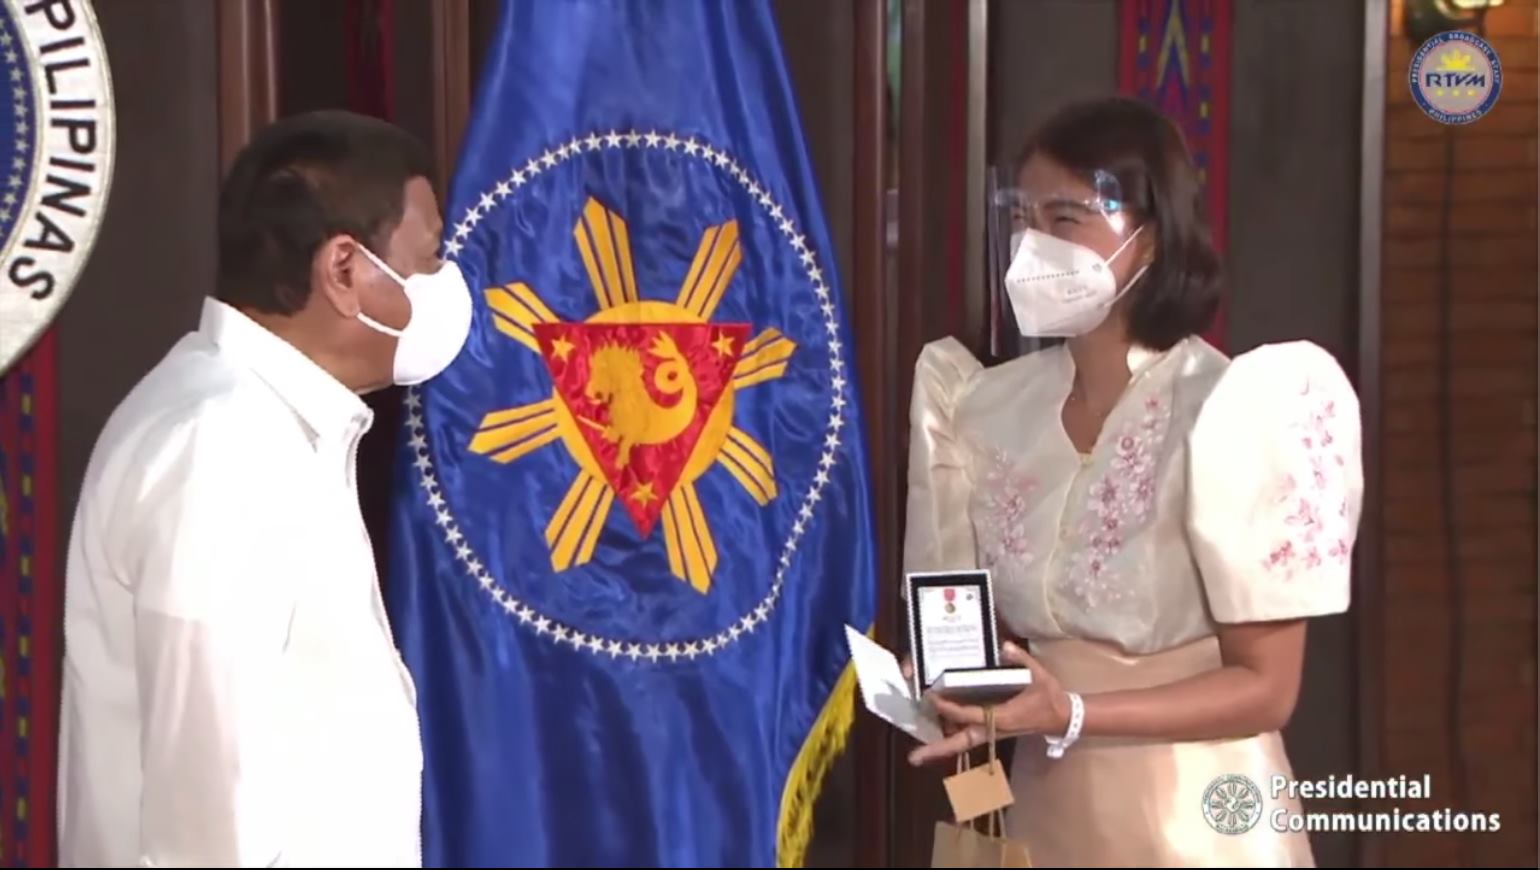 Nurse Kathrina Bianca Macababbad (right) was conferred the Order of Lapu-Lapu along with nine others on Wednesday, June 2, for their quick action that saved the lives of patients in the government-run hospital in Manila. She and her colleague Nurse Jomar Mallari ran back and forth the hospital’s neonatal intensive care unit to transfer 35 babies to safety while carrying emergency medicines and breathing equipment to sustain them through the evacuation.